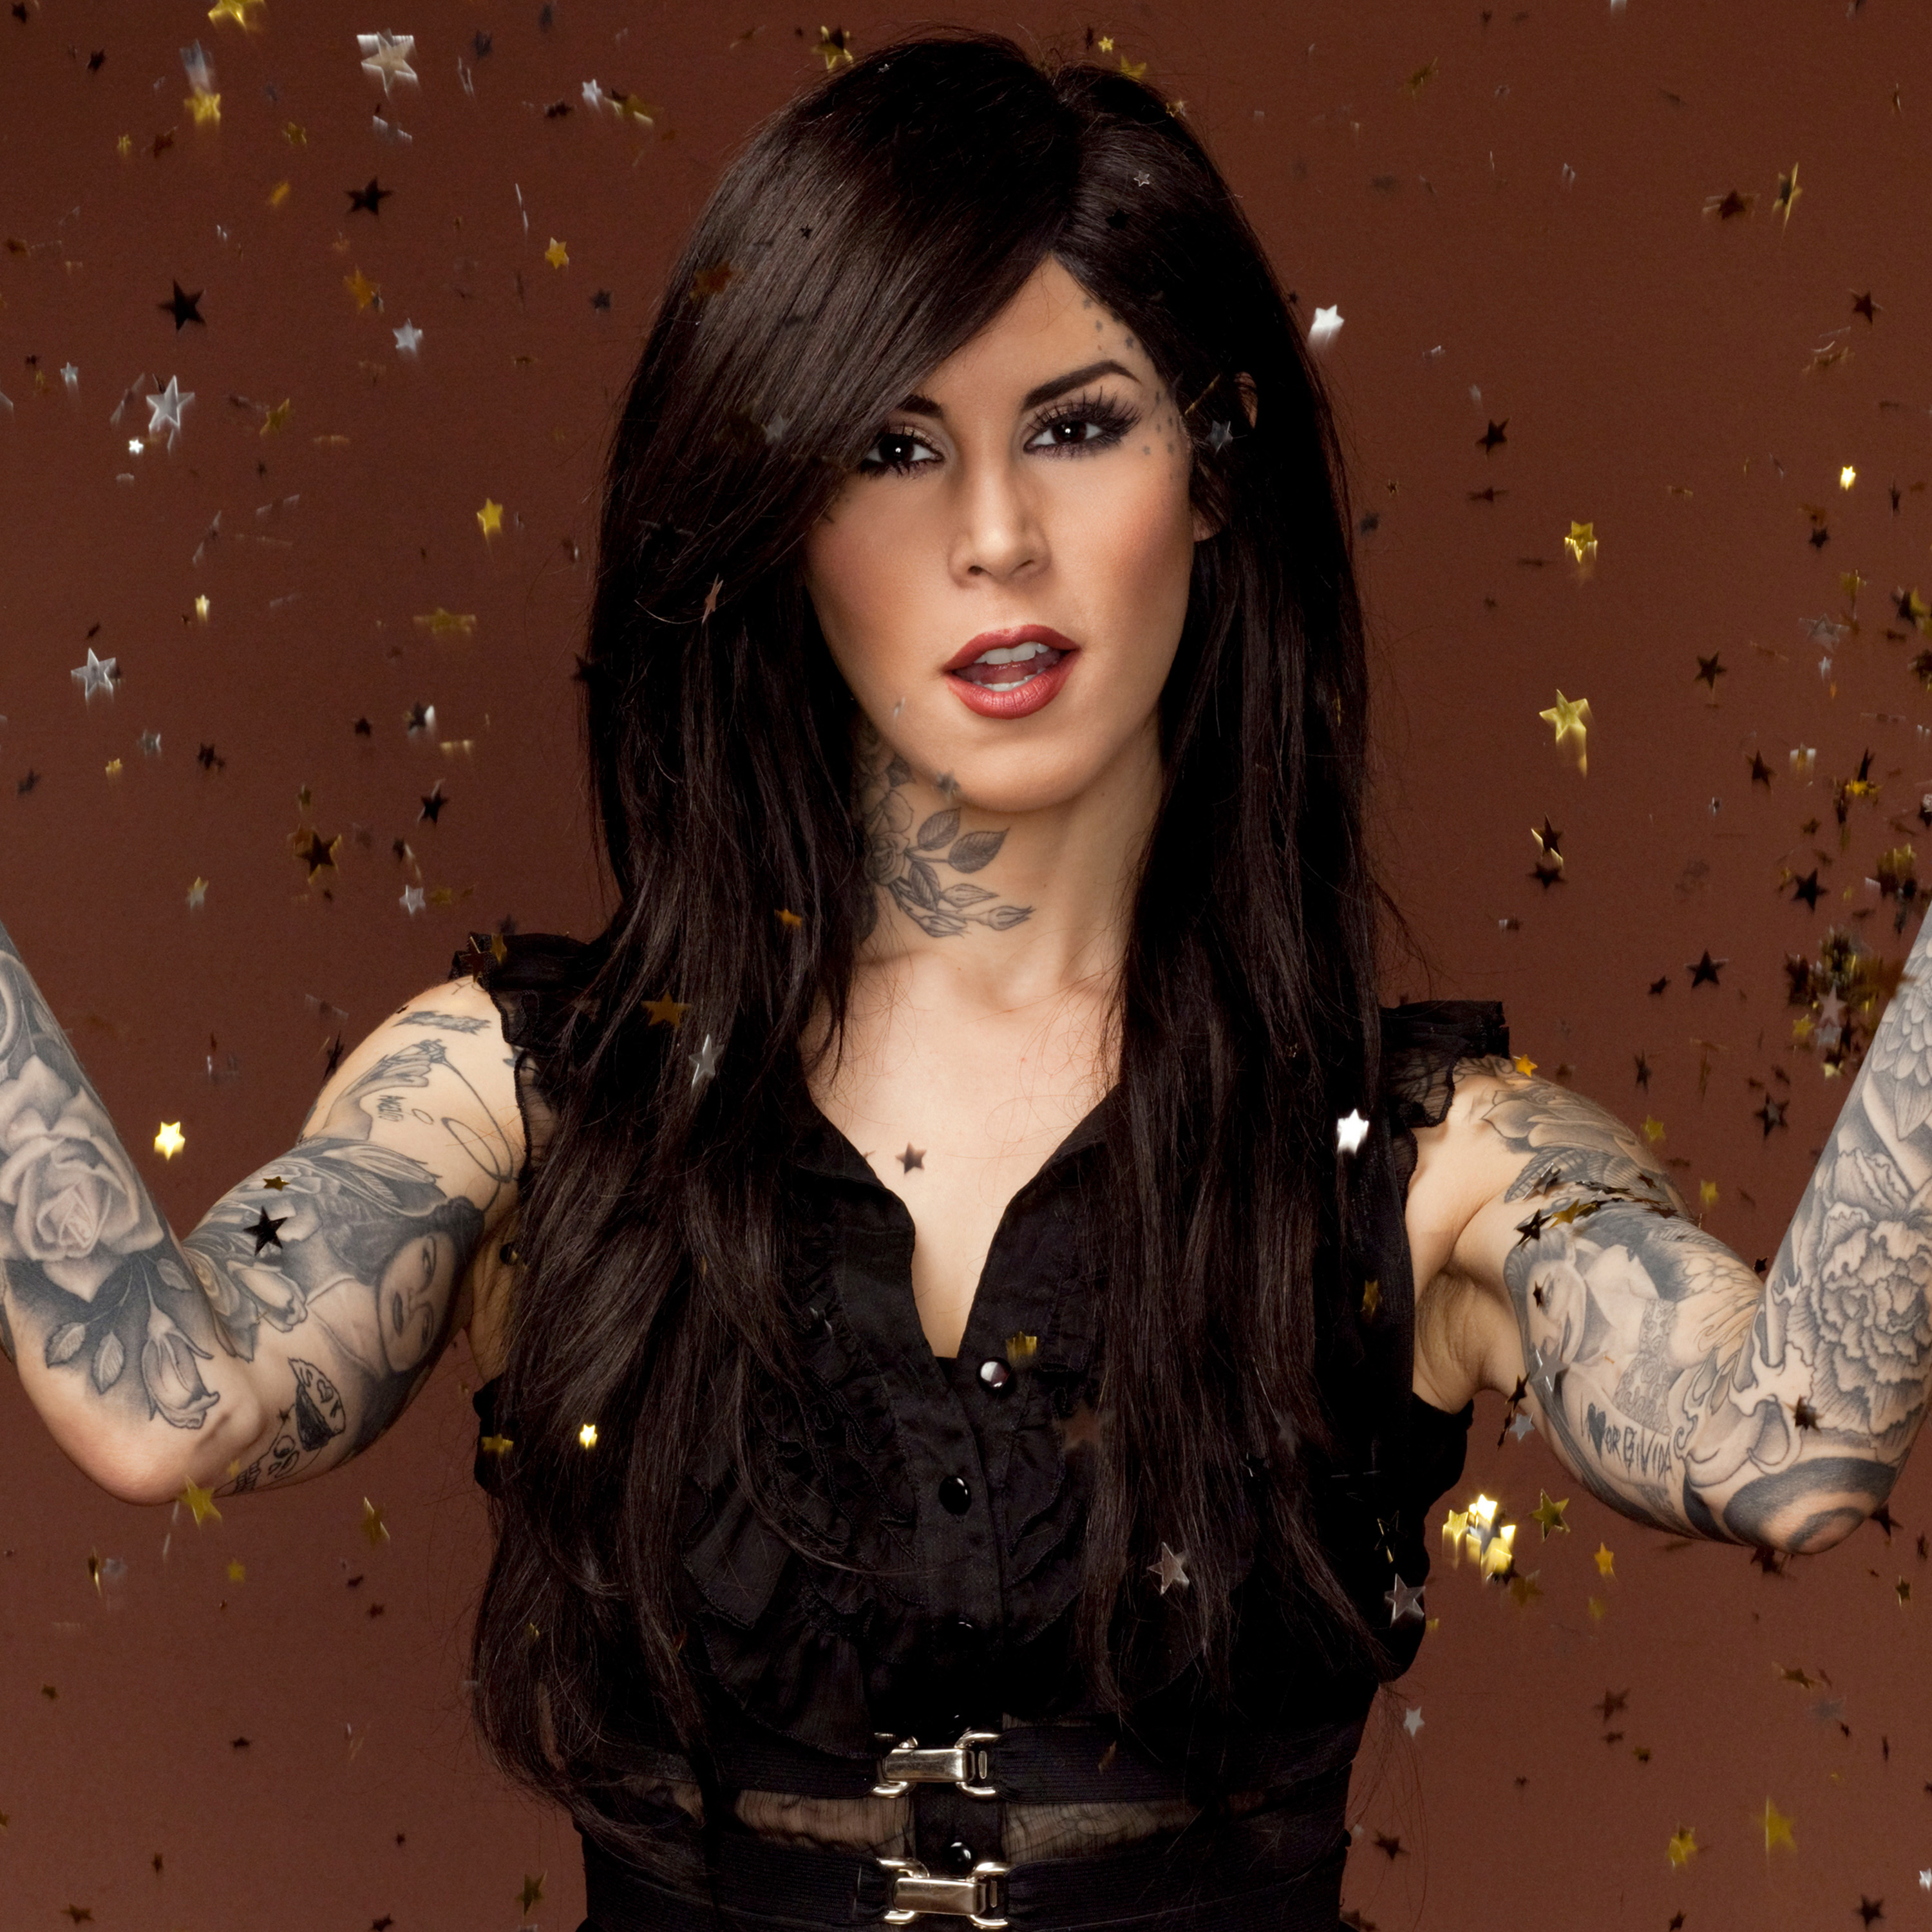 ** FILE ** Kat Von D, star of the tattoo reality TV show 